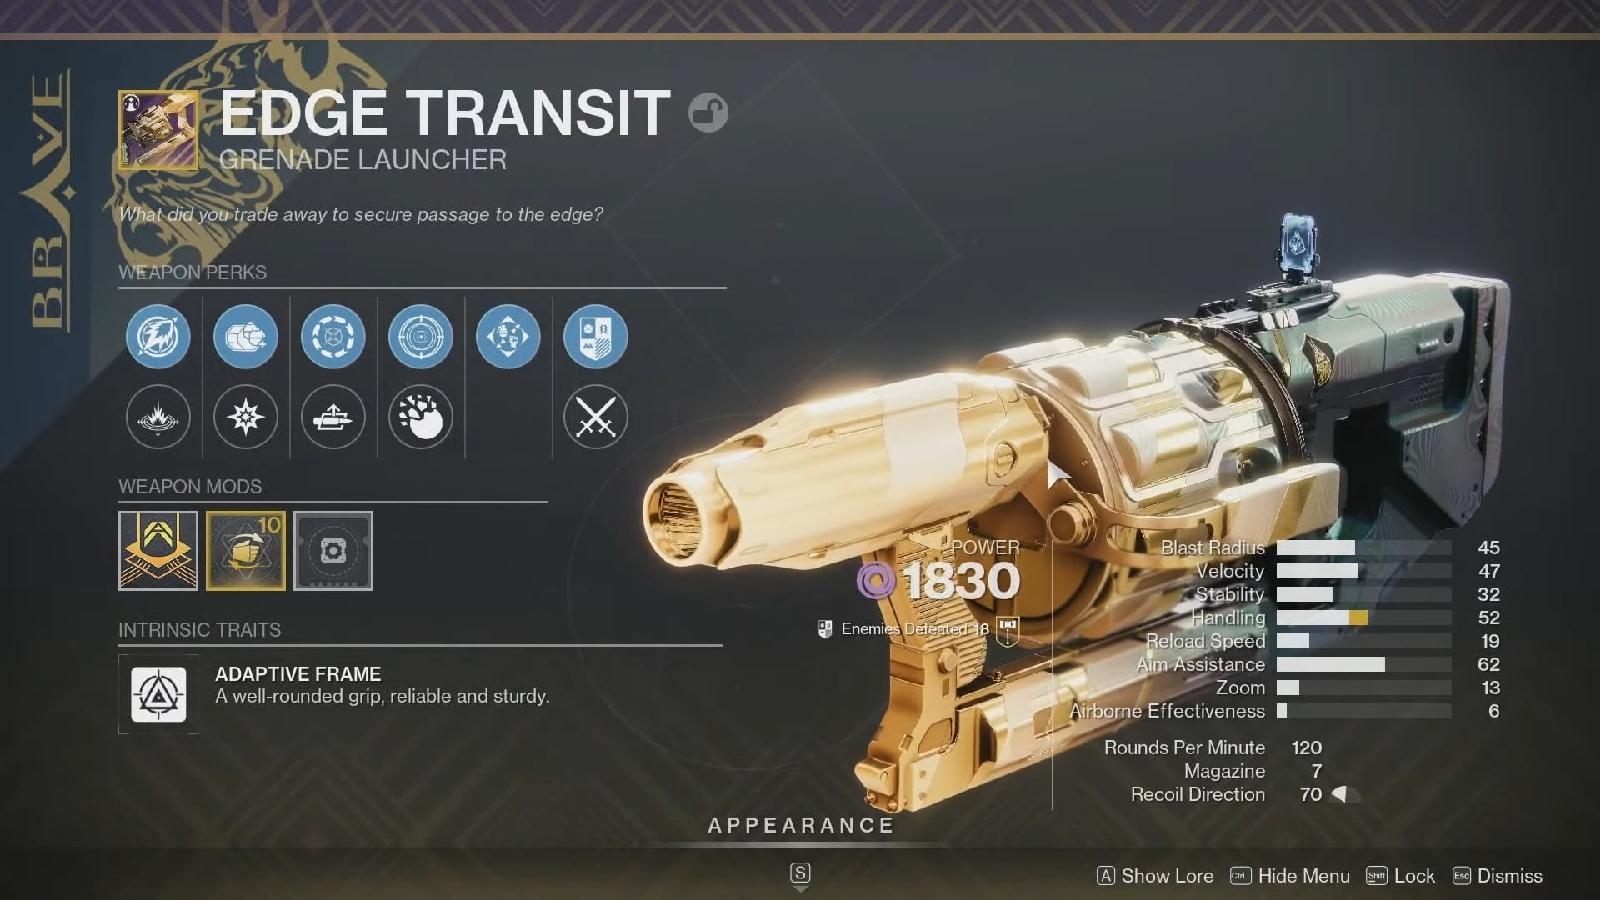 Destiny 2's Edge Transit heavy grenade launcher from Into the Light